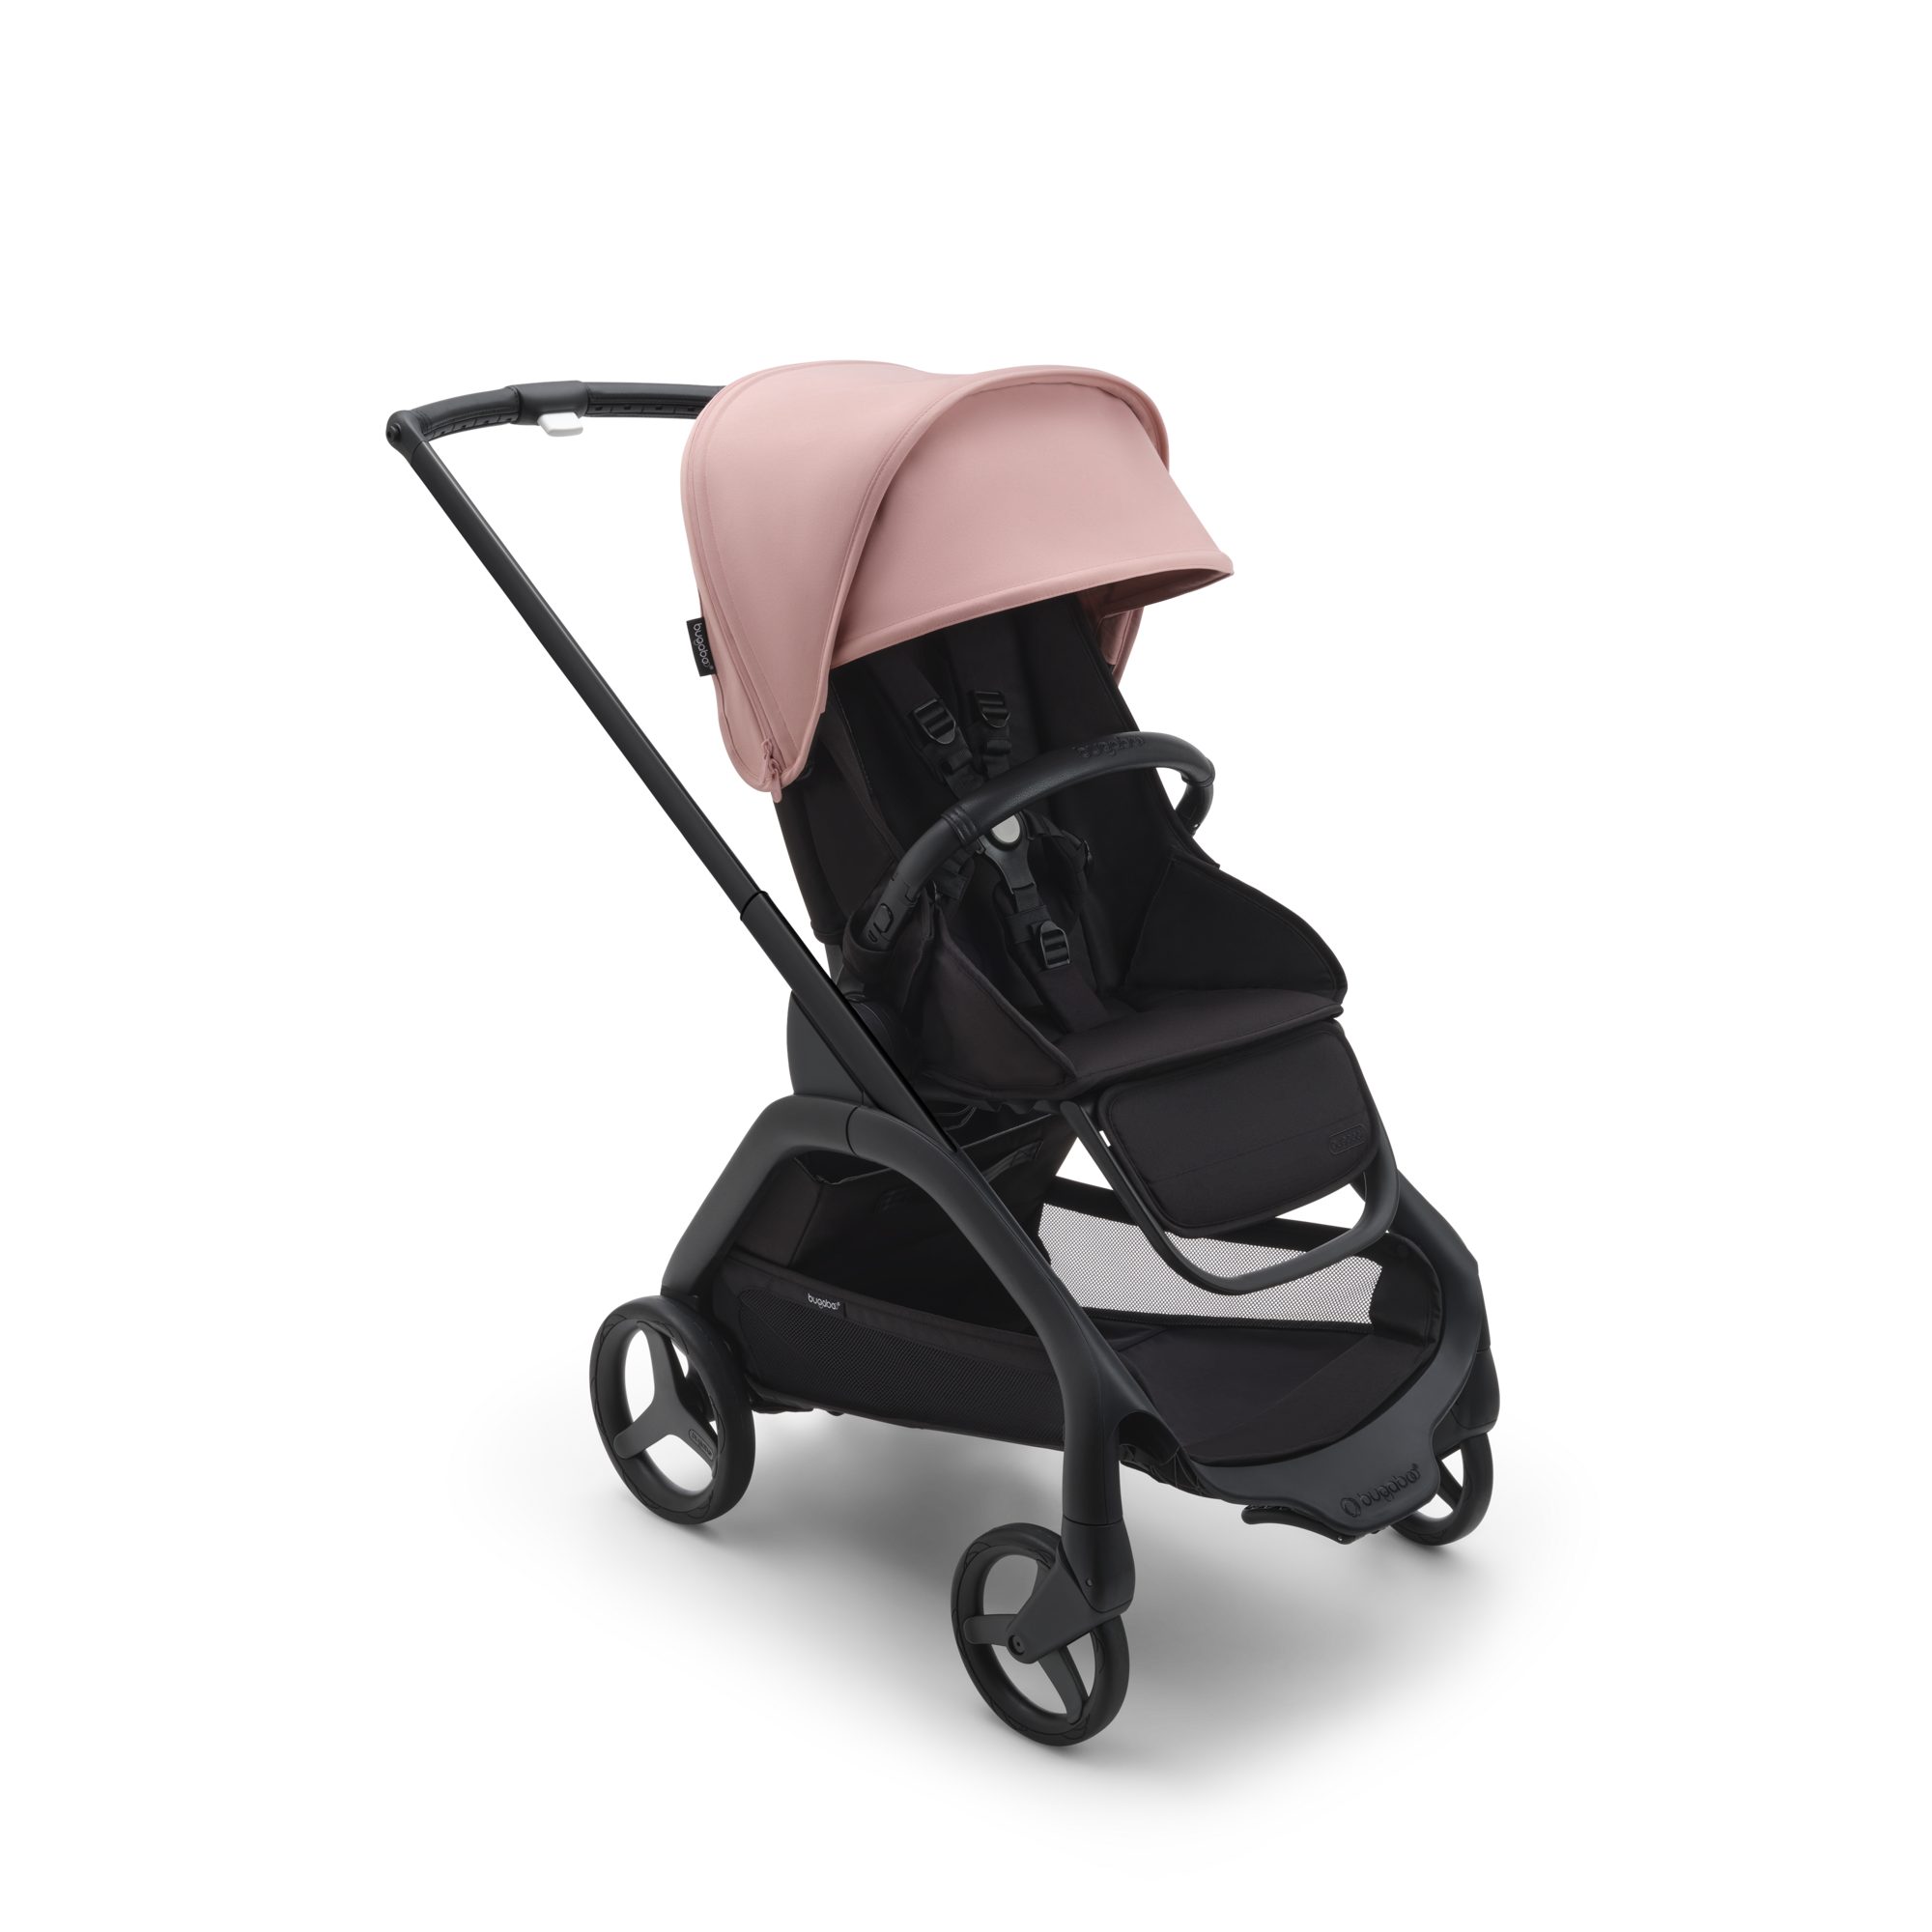 Bugaboo Dragonfly seat only stroller black base midnight black fabrics morning pink sun canopy